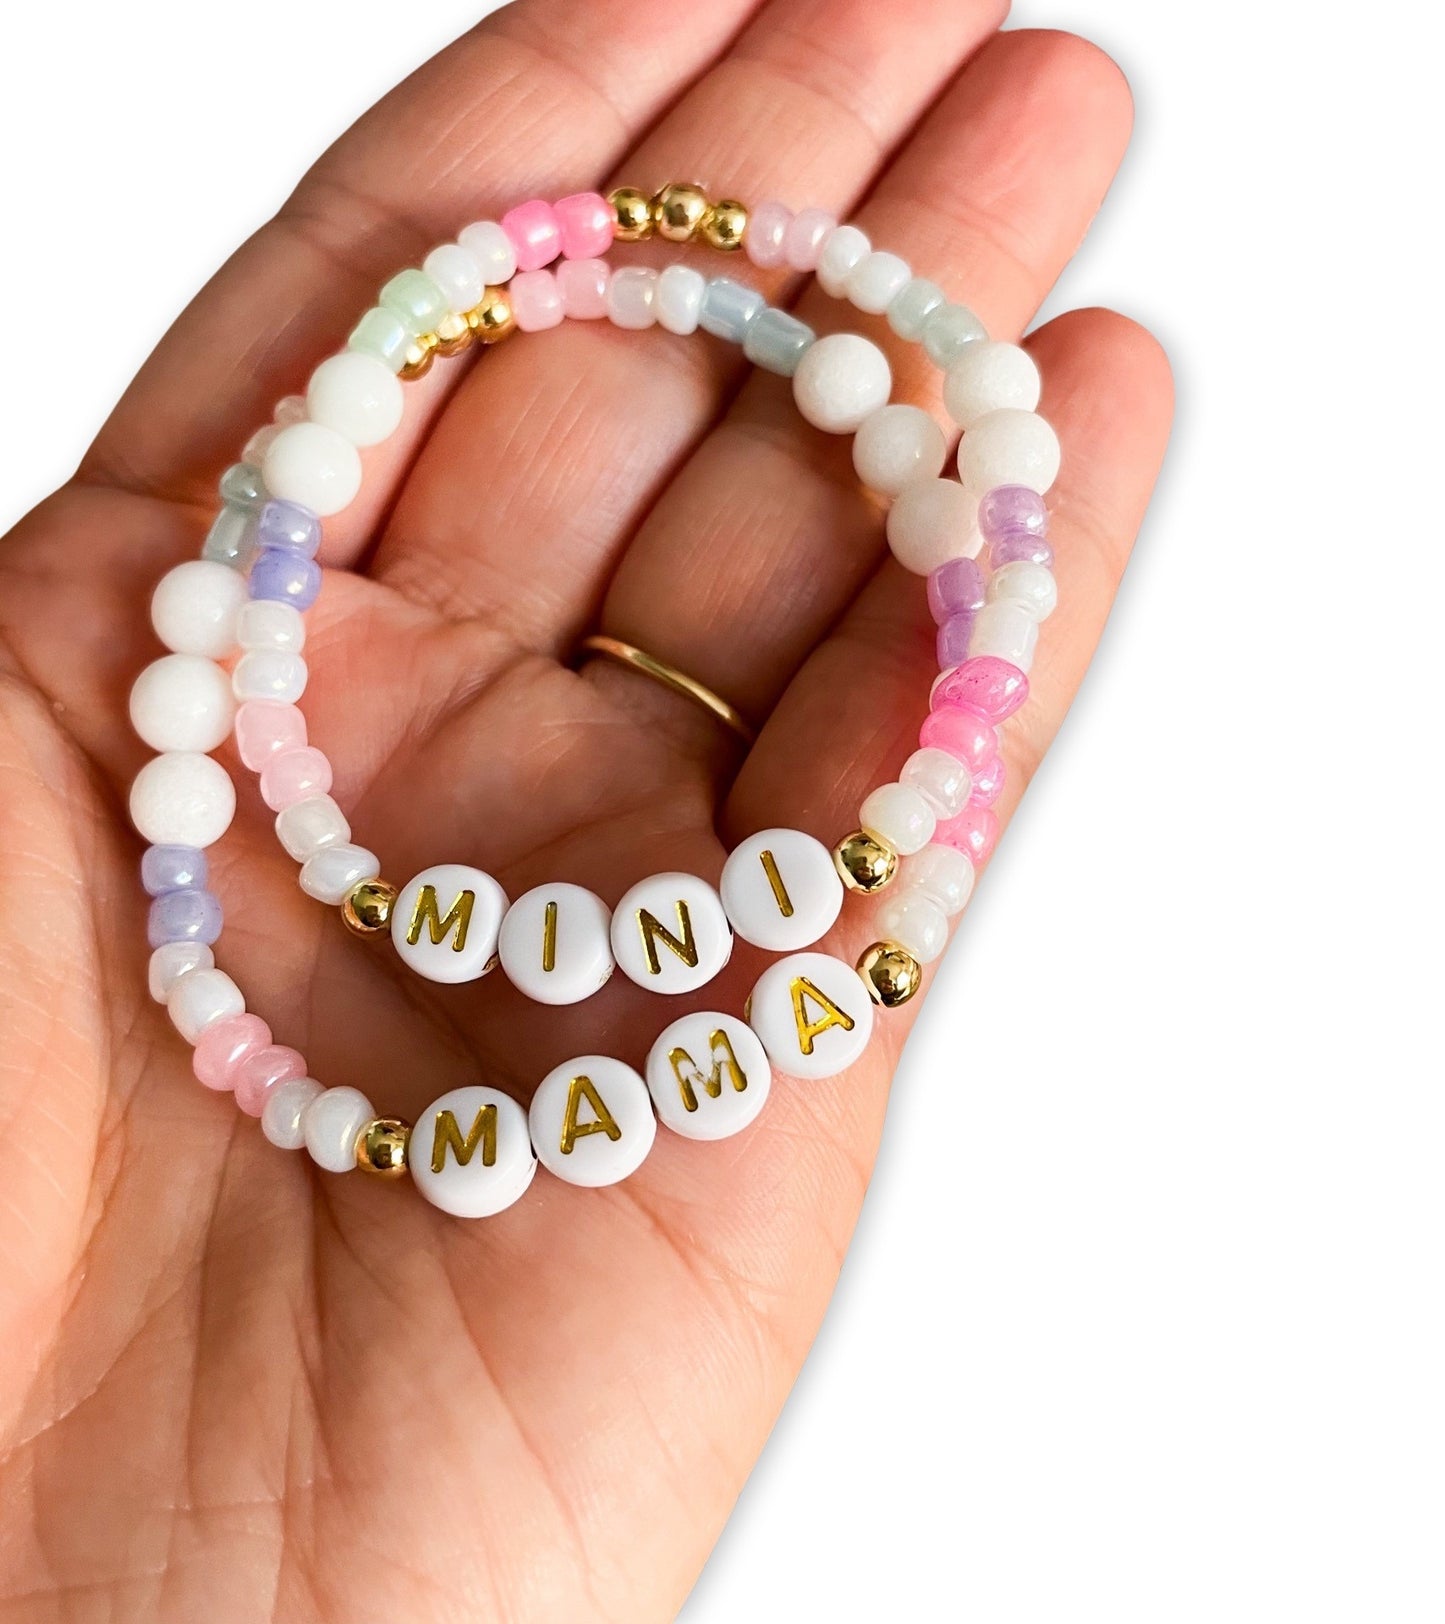 Spring is in the Air - Bracelets